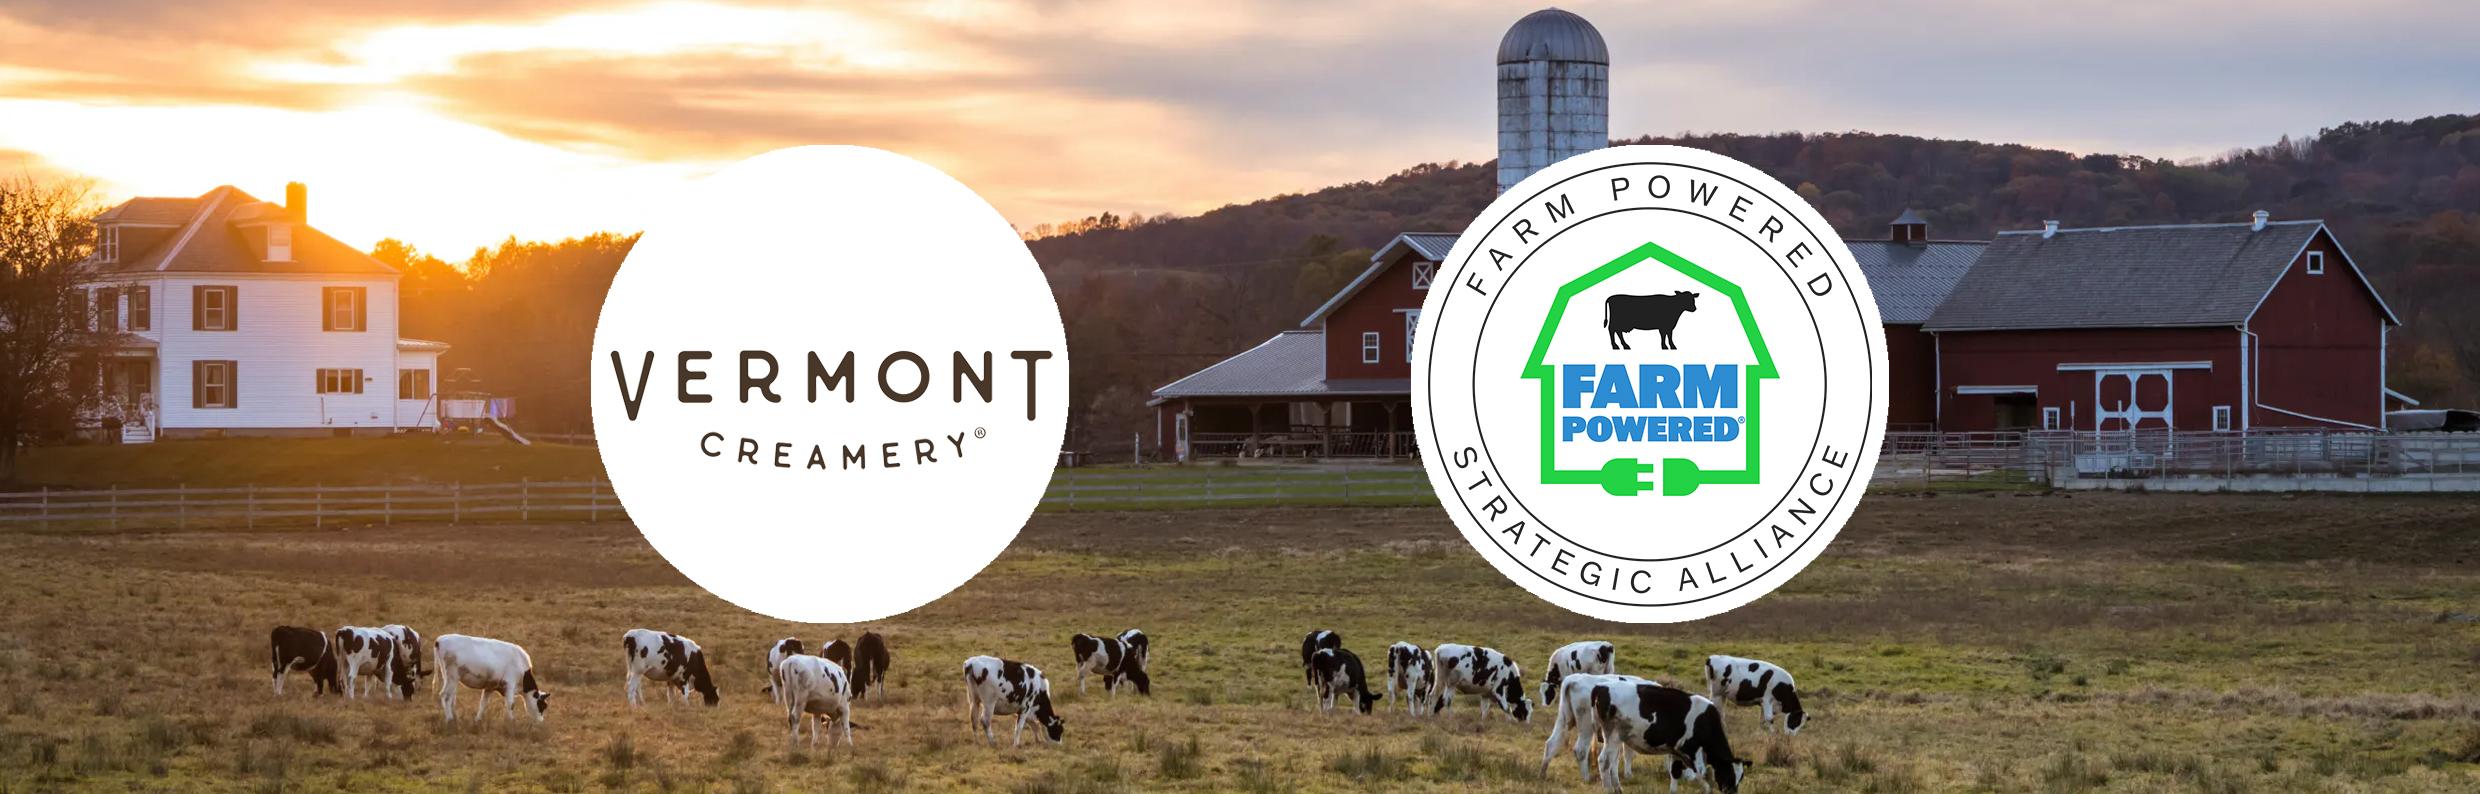 Logos of Vermont Creamery and Farm Powered Strategic Alliance, with a background image of a farm using anaerobic digestion